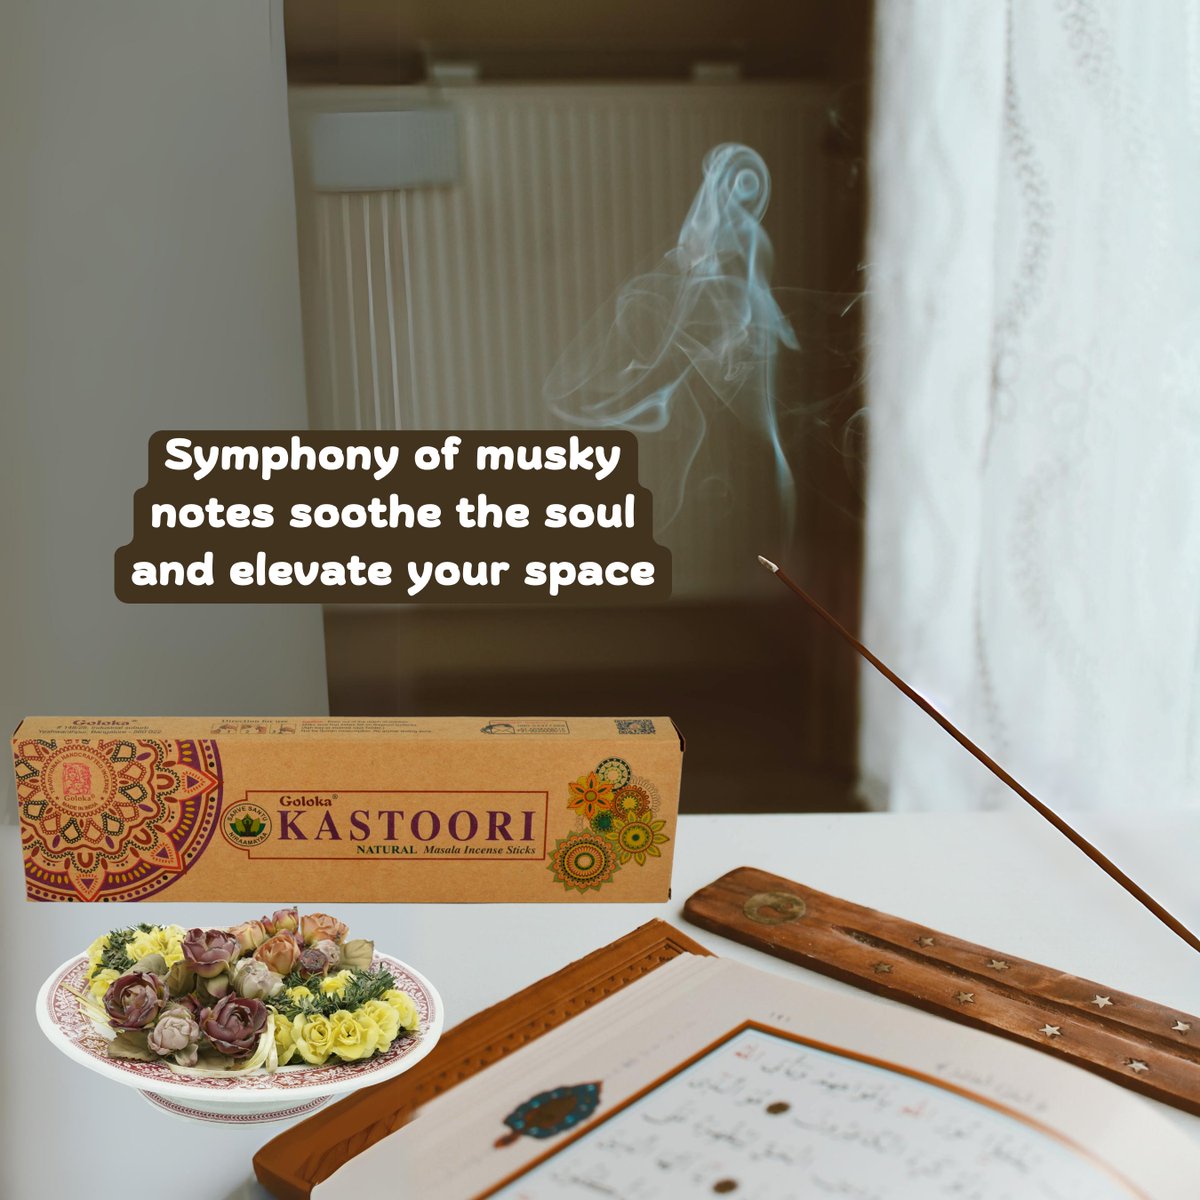 Let aroma of #GolokaOrganicaKastoori #IncenseSticks whisk you away on #SensoryJourney. Crafted with finest ingredients, each stick ignites a symphony of #MuskyNotes that #ElevateYourSpace. Experience #serenity with #Goloka #OrganicaKastoori #Agarbatti - golokaonline.in